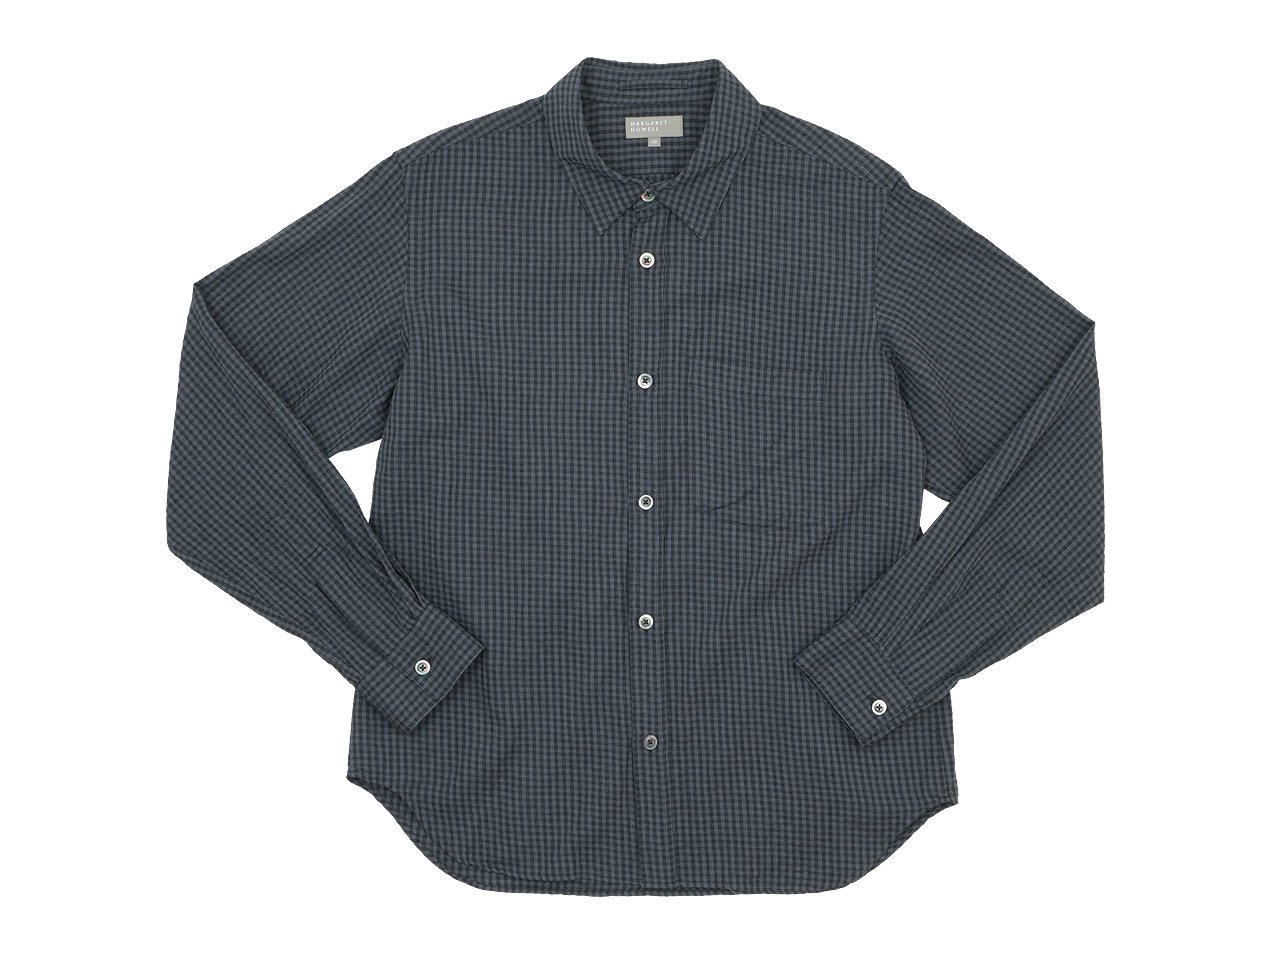 MARGARET HOWELL GINGHAM COTTON CASHMERE MINIMAL SHIRTS CHARCOAL